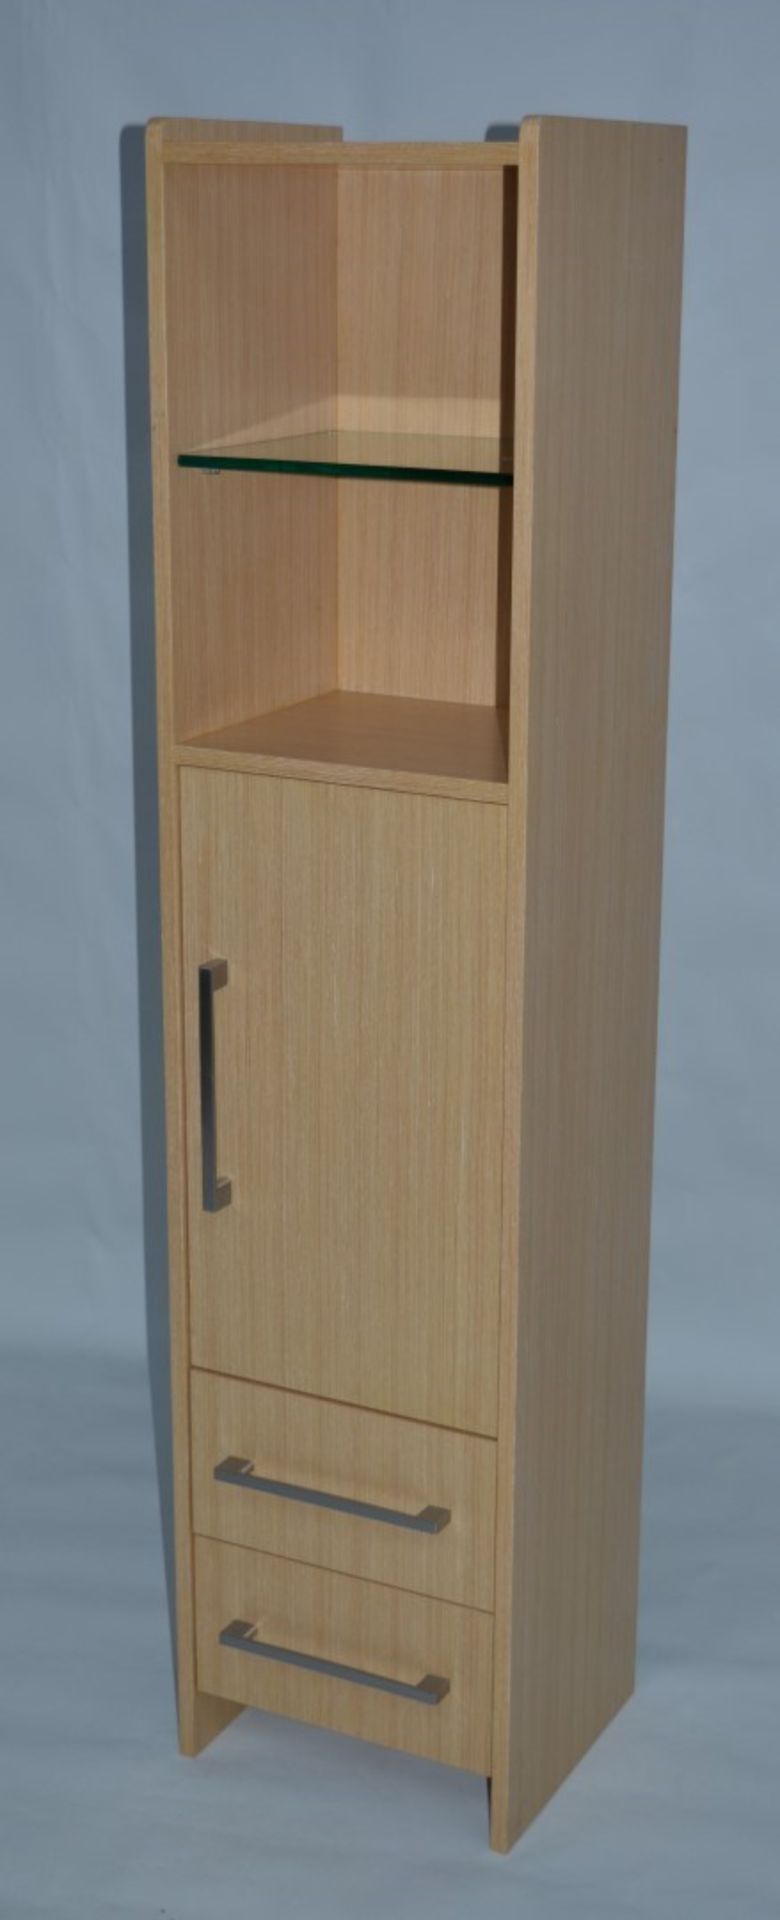 1 x Vogue ARC Series 2 Bathroom Floor Standing TALL BOY in LIGHT OAK - Manufactured to the Highest